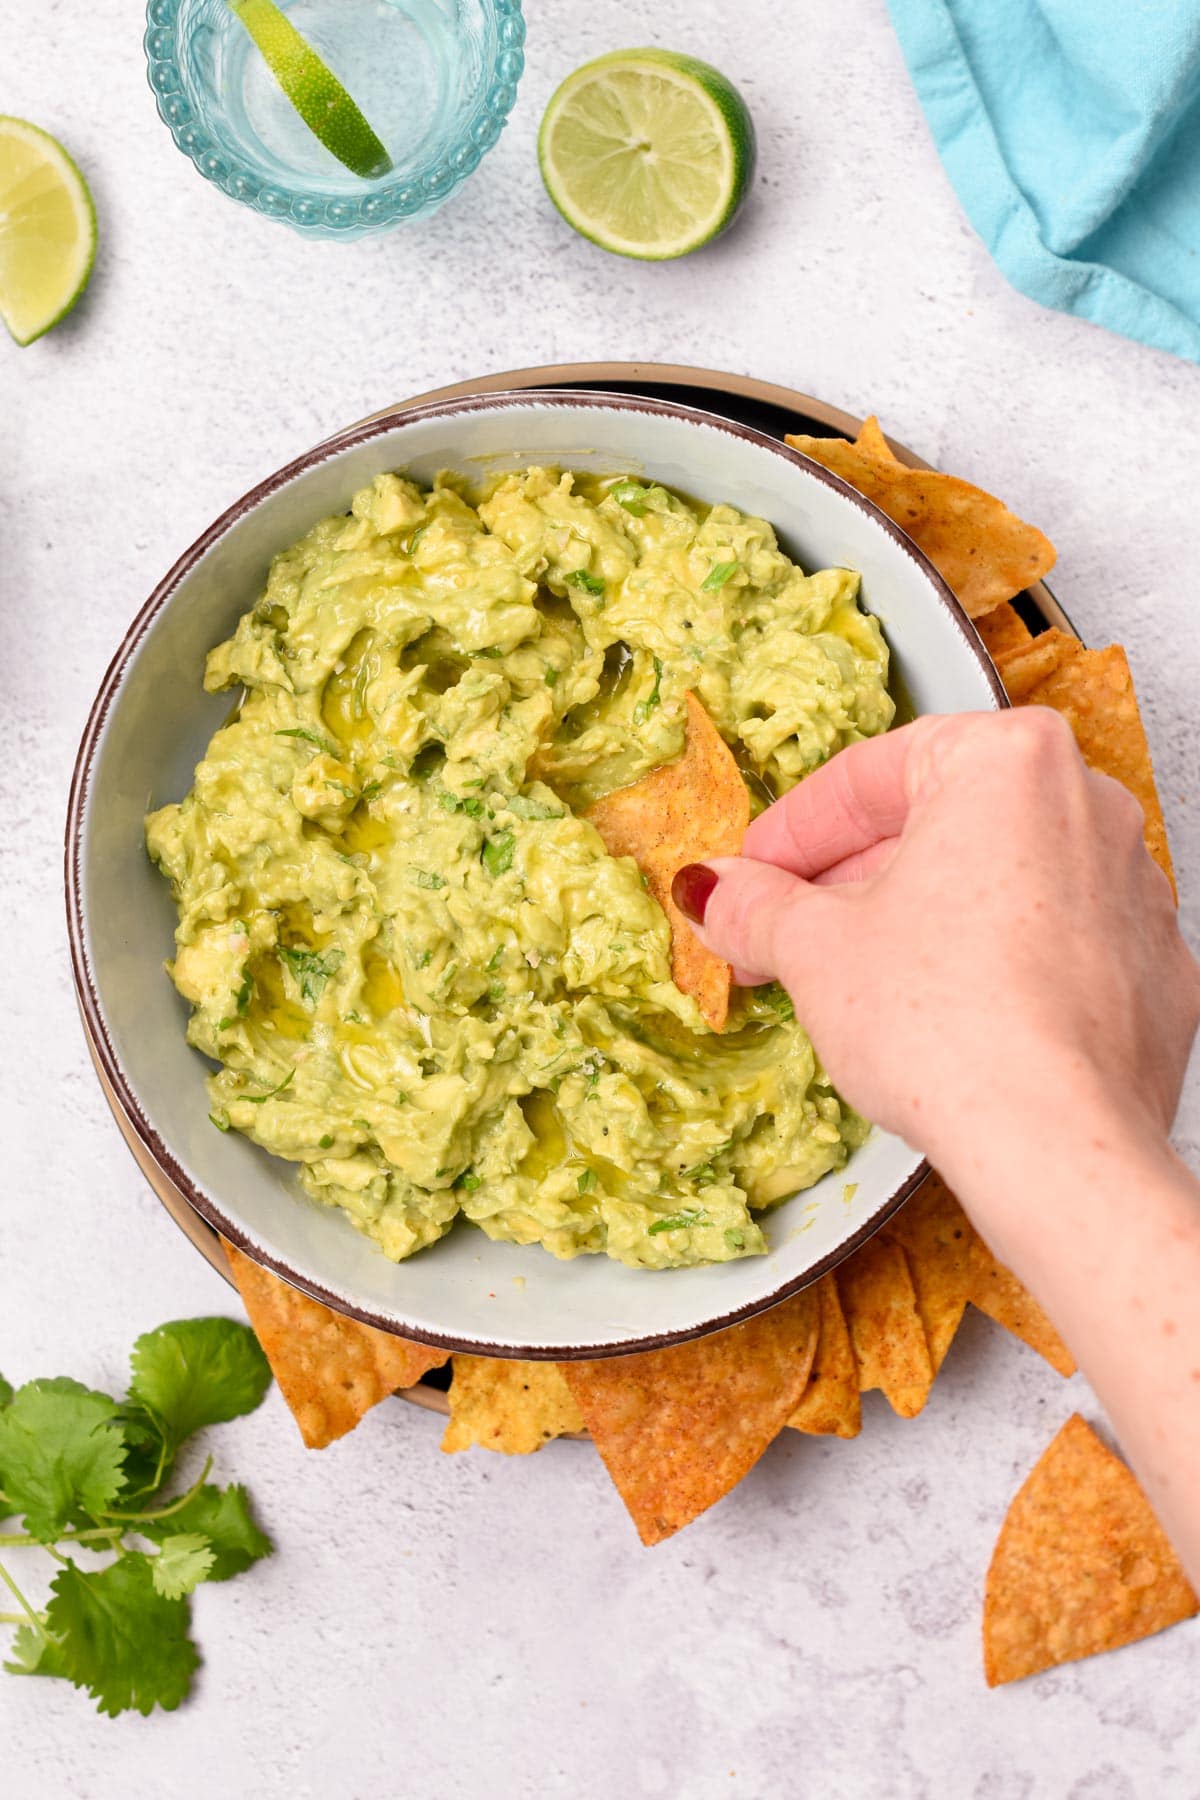 This 4-Ingredient Guacamole Recipe is a healthy easy avocado dip 100% dairy-free, gluten-free ready in less than 10 minutes for an easy last-minute appetizer or snack.